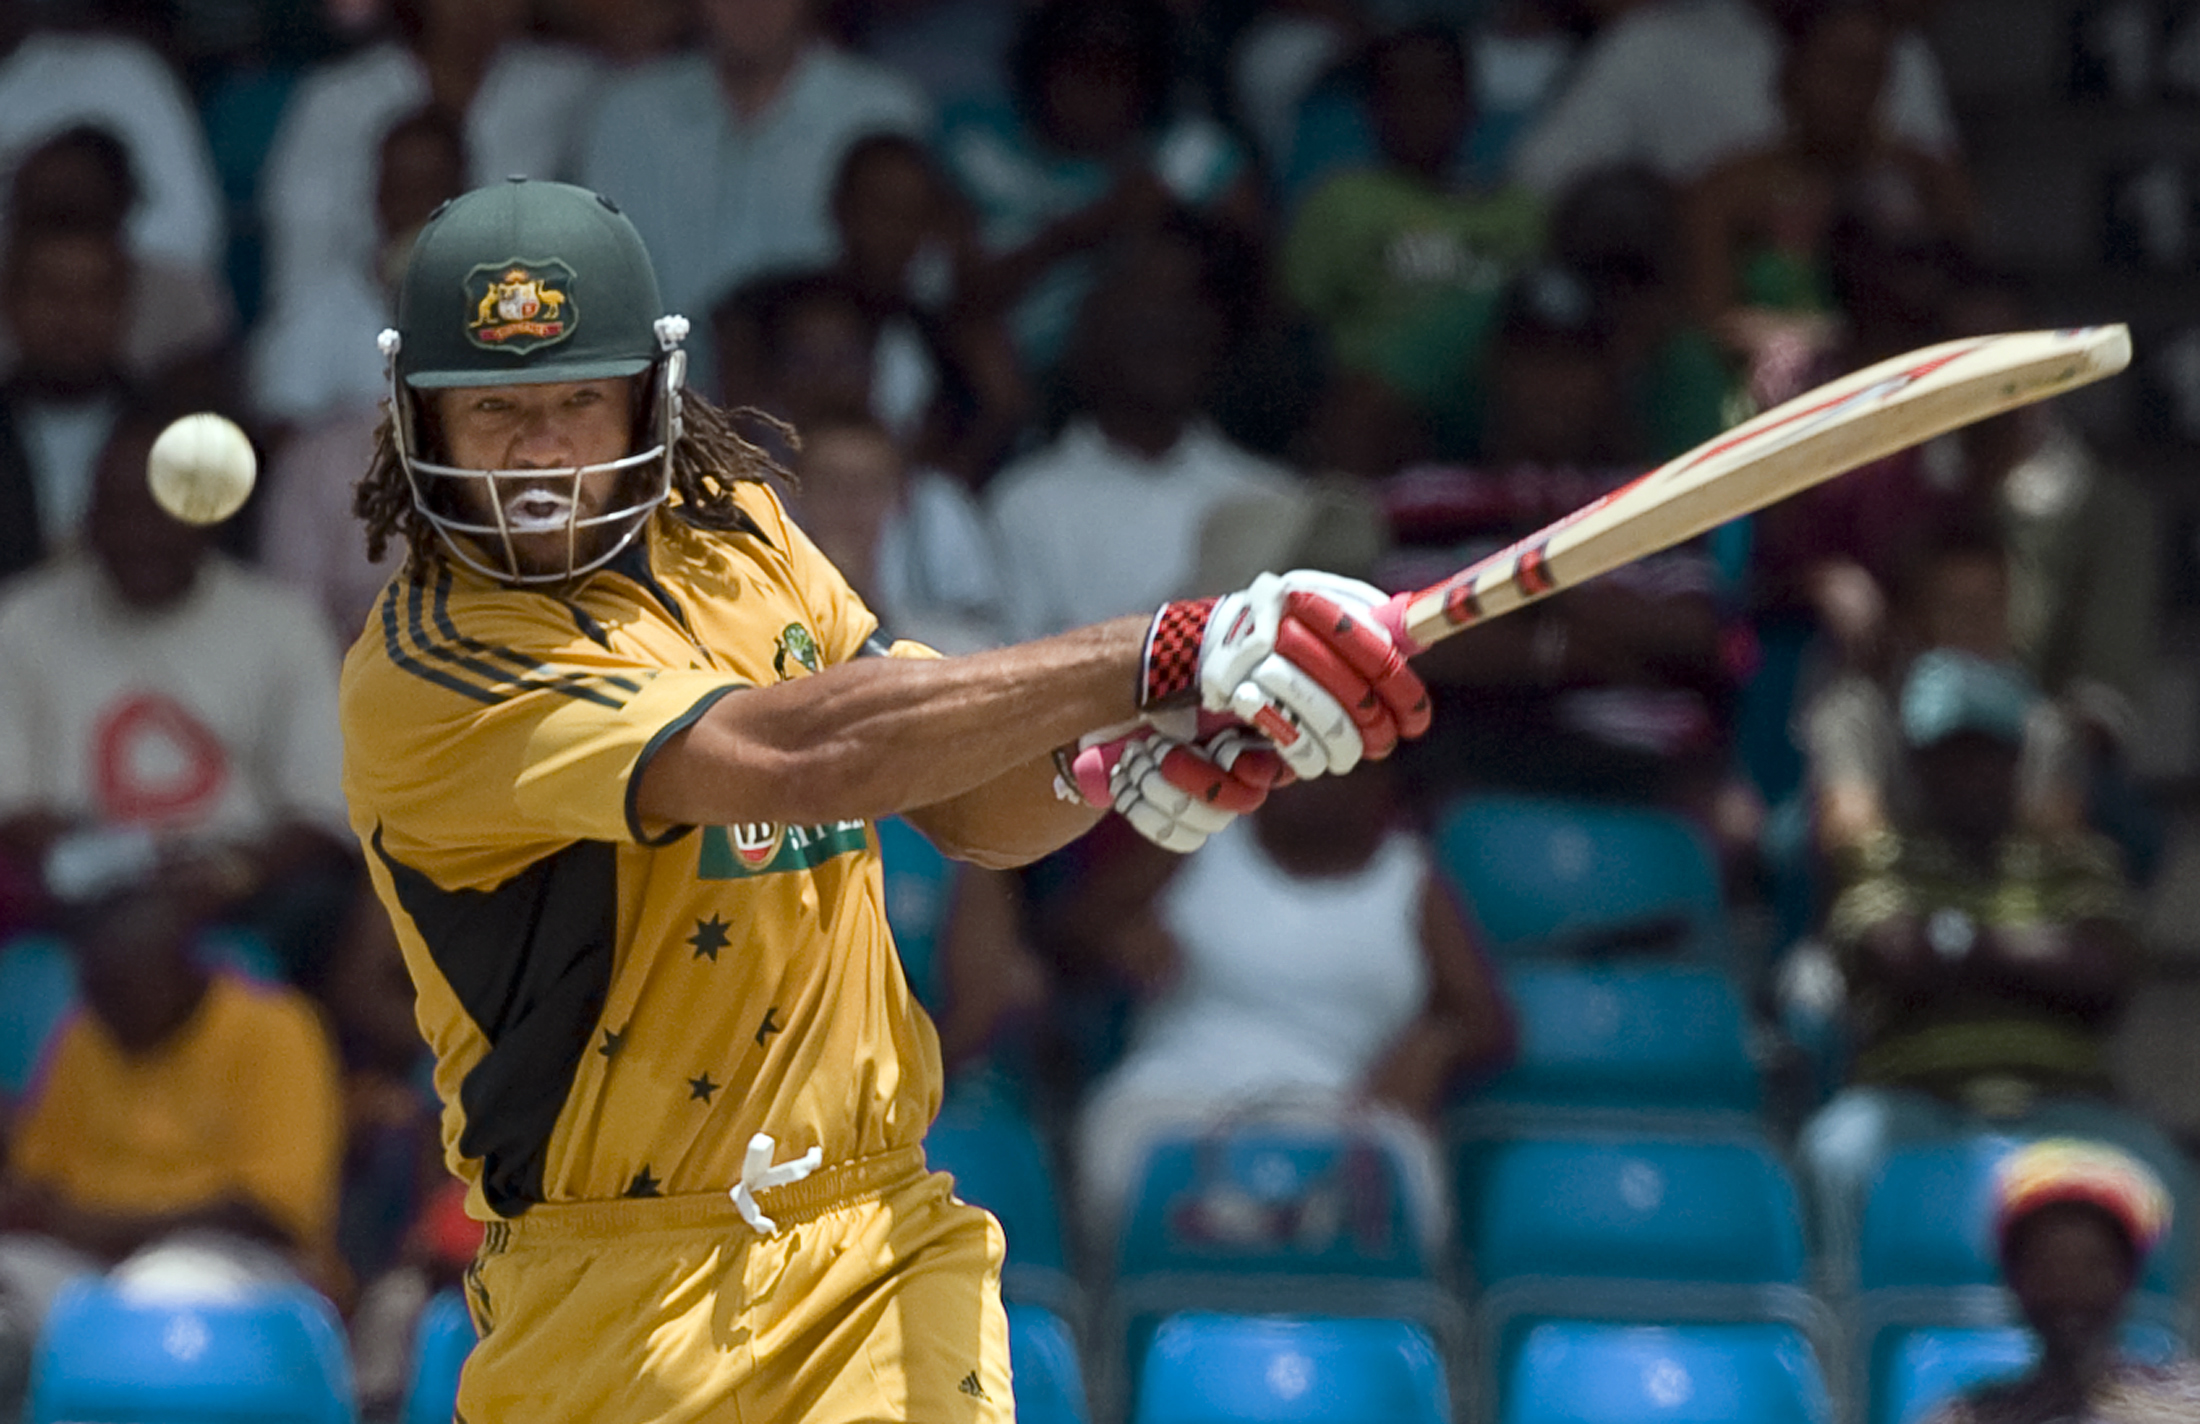 Australia's Symonds bats during their cricket international against West Indies in St. Kitts